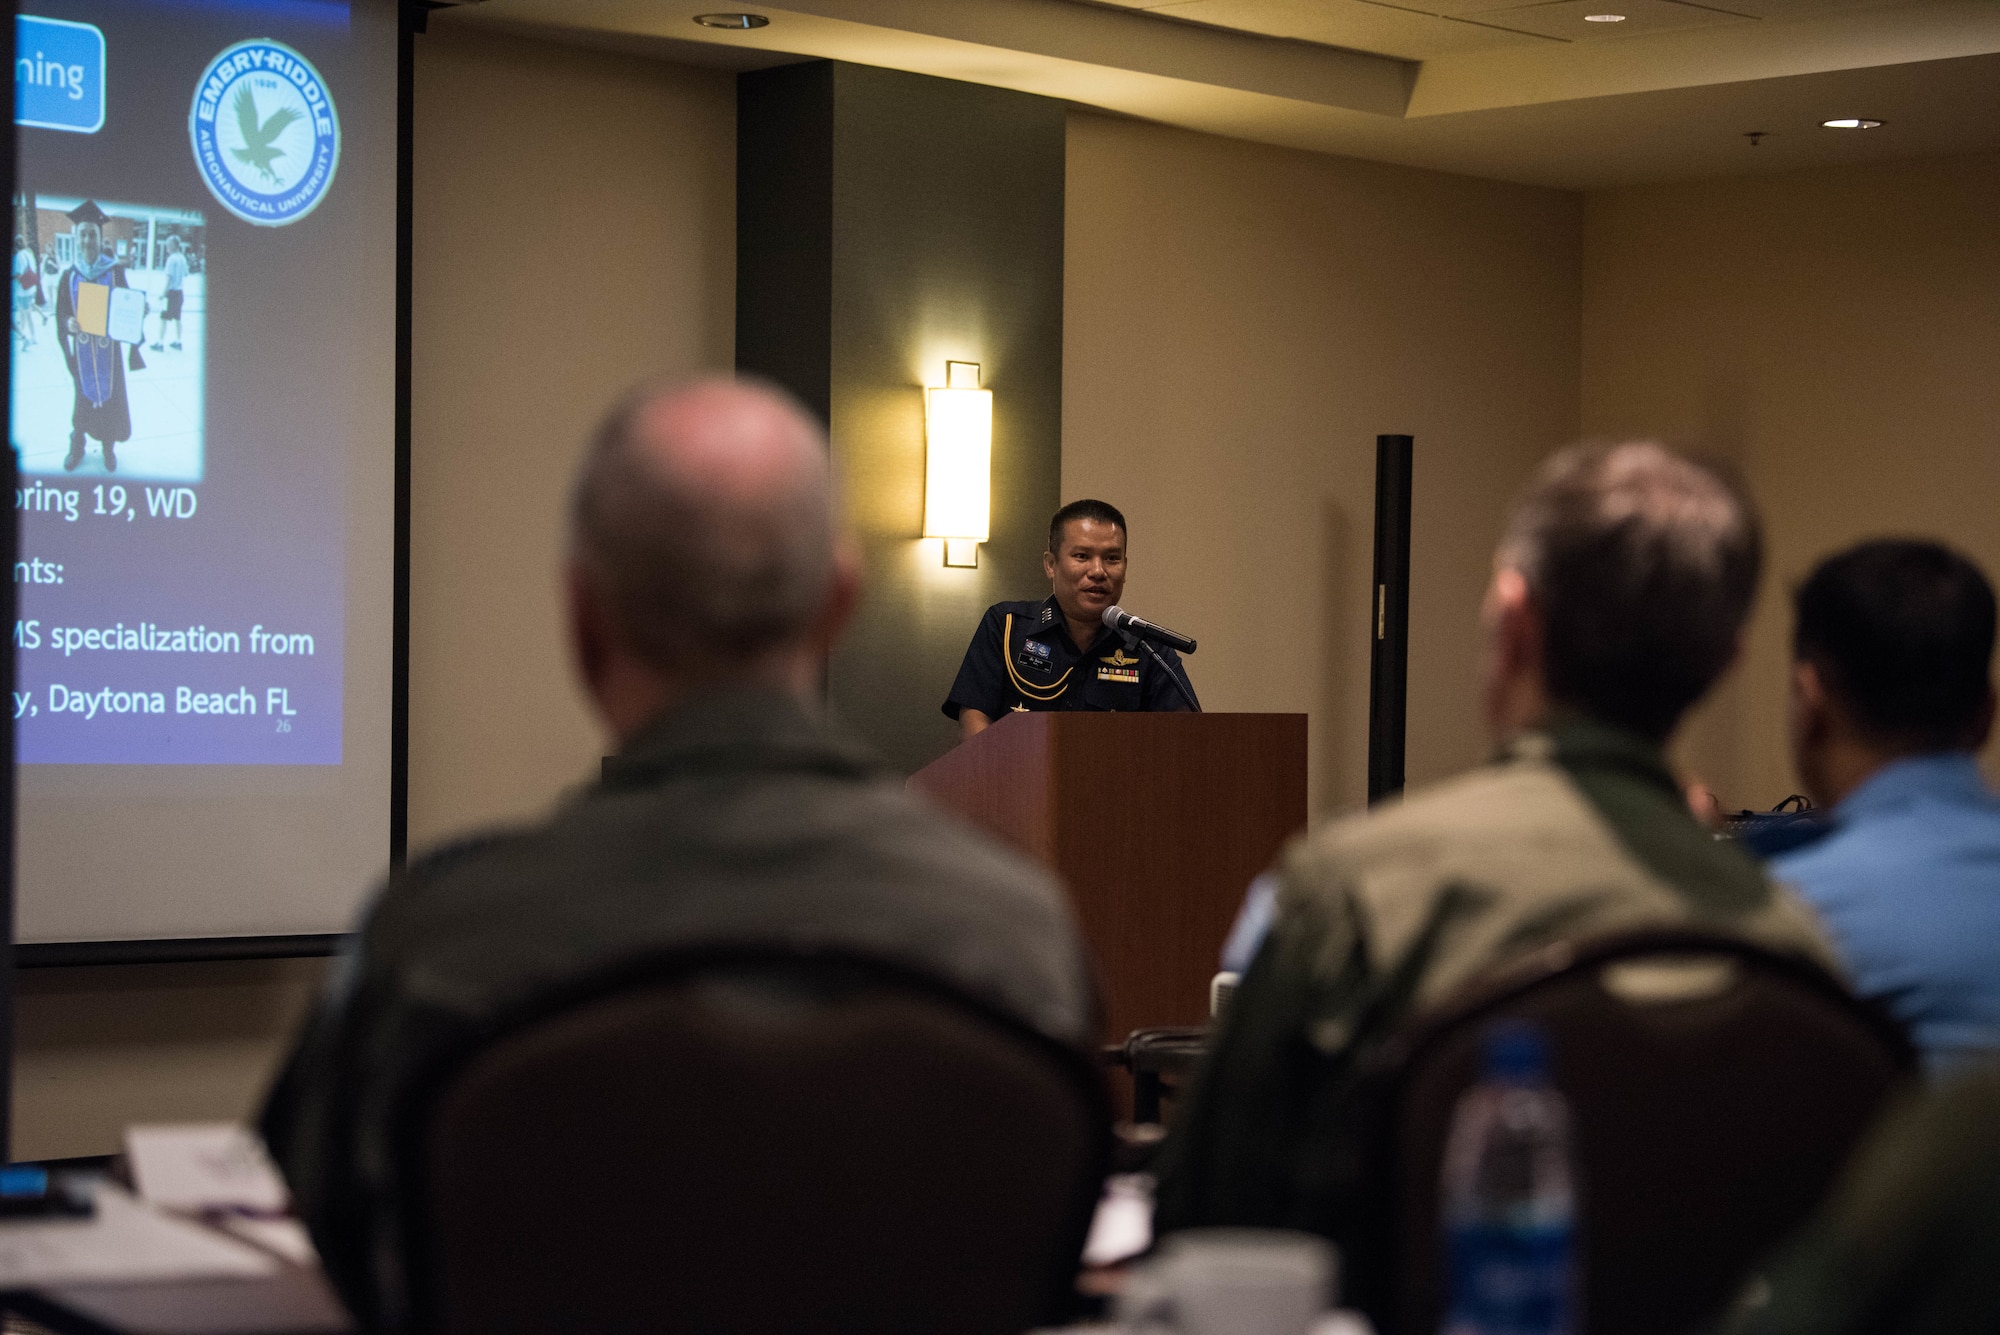 Royal Thai Air Force Group Capt. Sua Luenum, Chief of Aircraft Accident Investigation of RTAF, gives a presentation during the annual Indo-Pacific Safety Air Forces Exchange in Waikiki, Hawaii, Aug. 20, 2019.